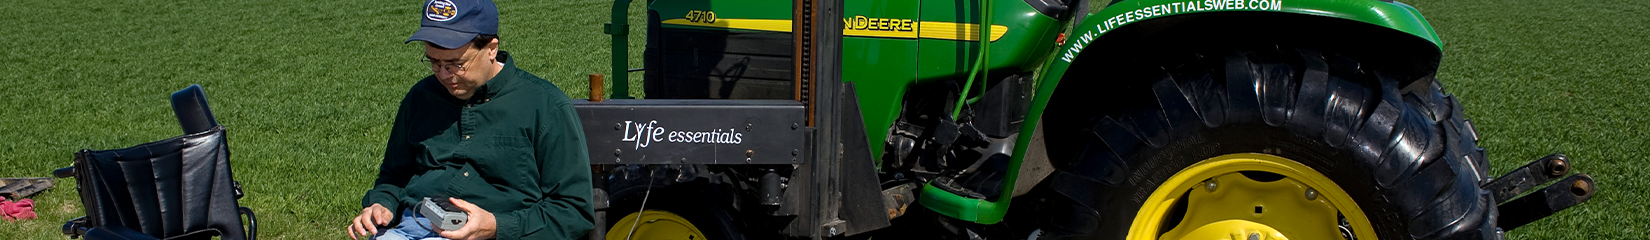 A person sitting alongside a John Deere tractor in their mobility device.